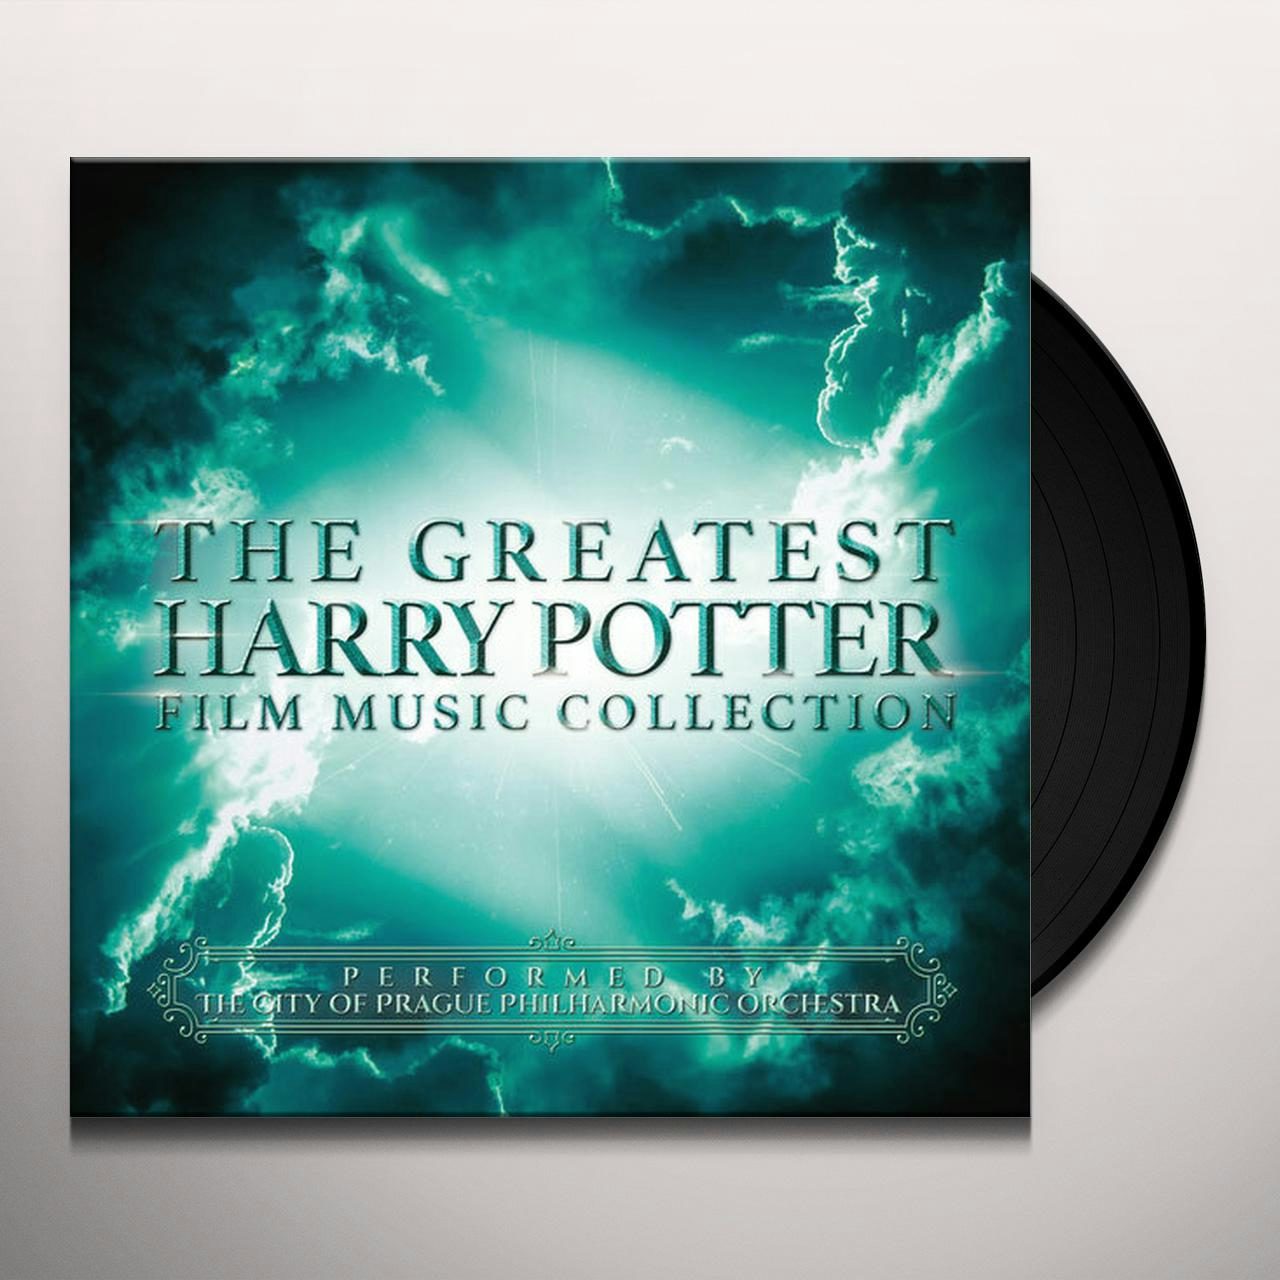 the complete harry potter film music collection vinyl